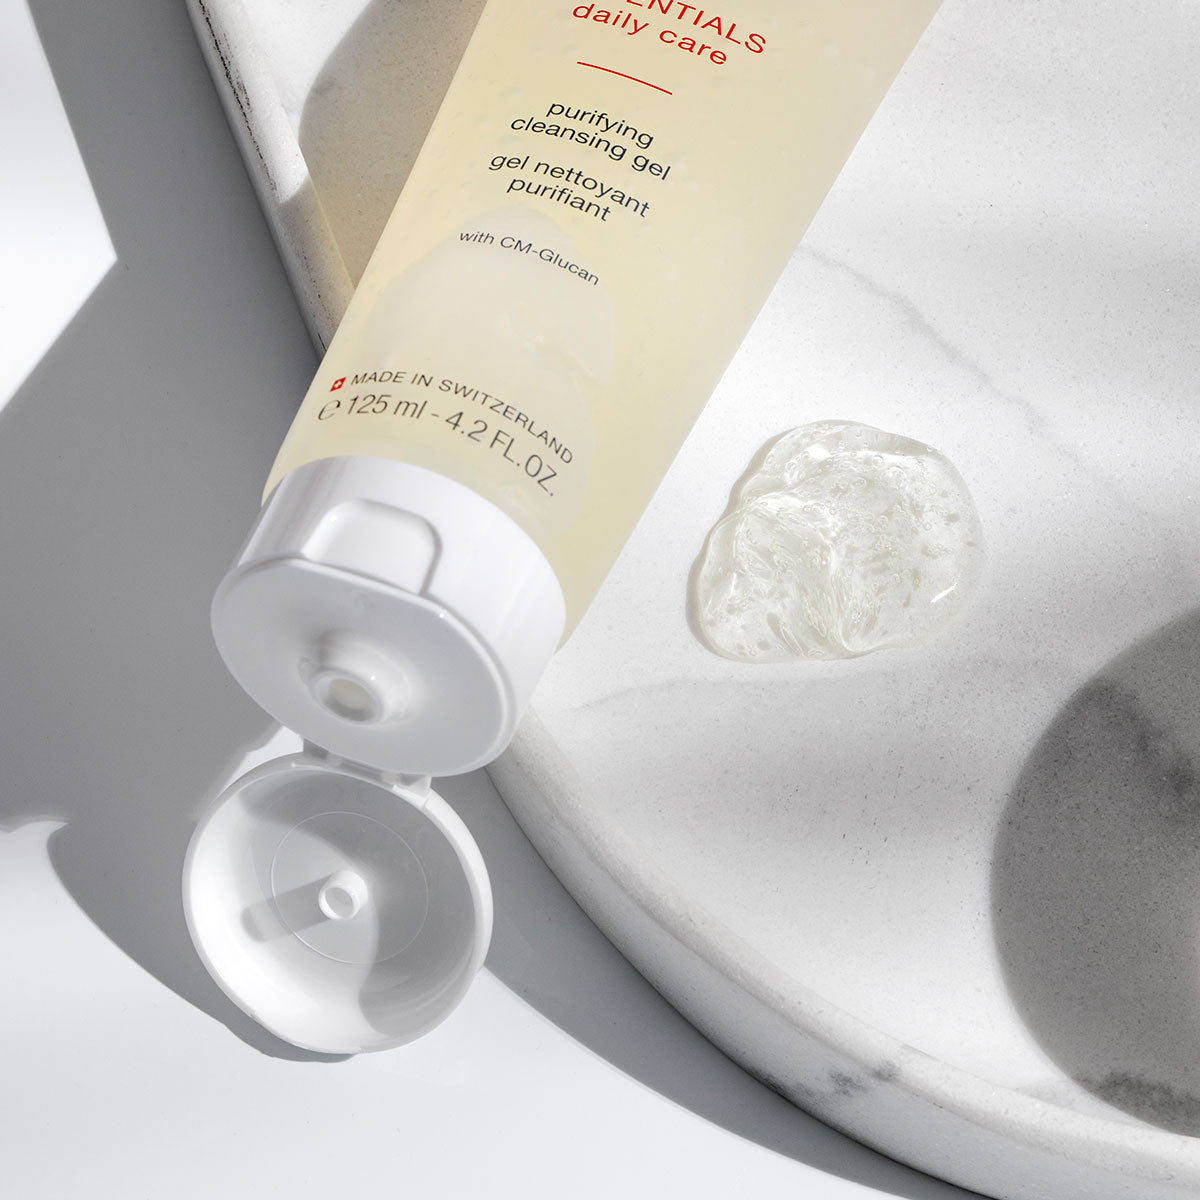 SkinCode Essentials, Purifying Cleansing Gel